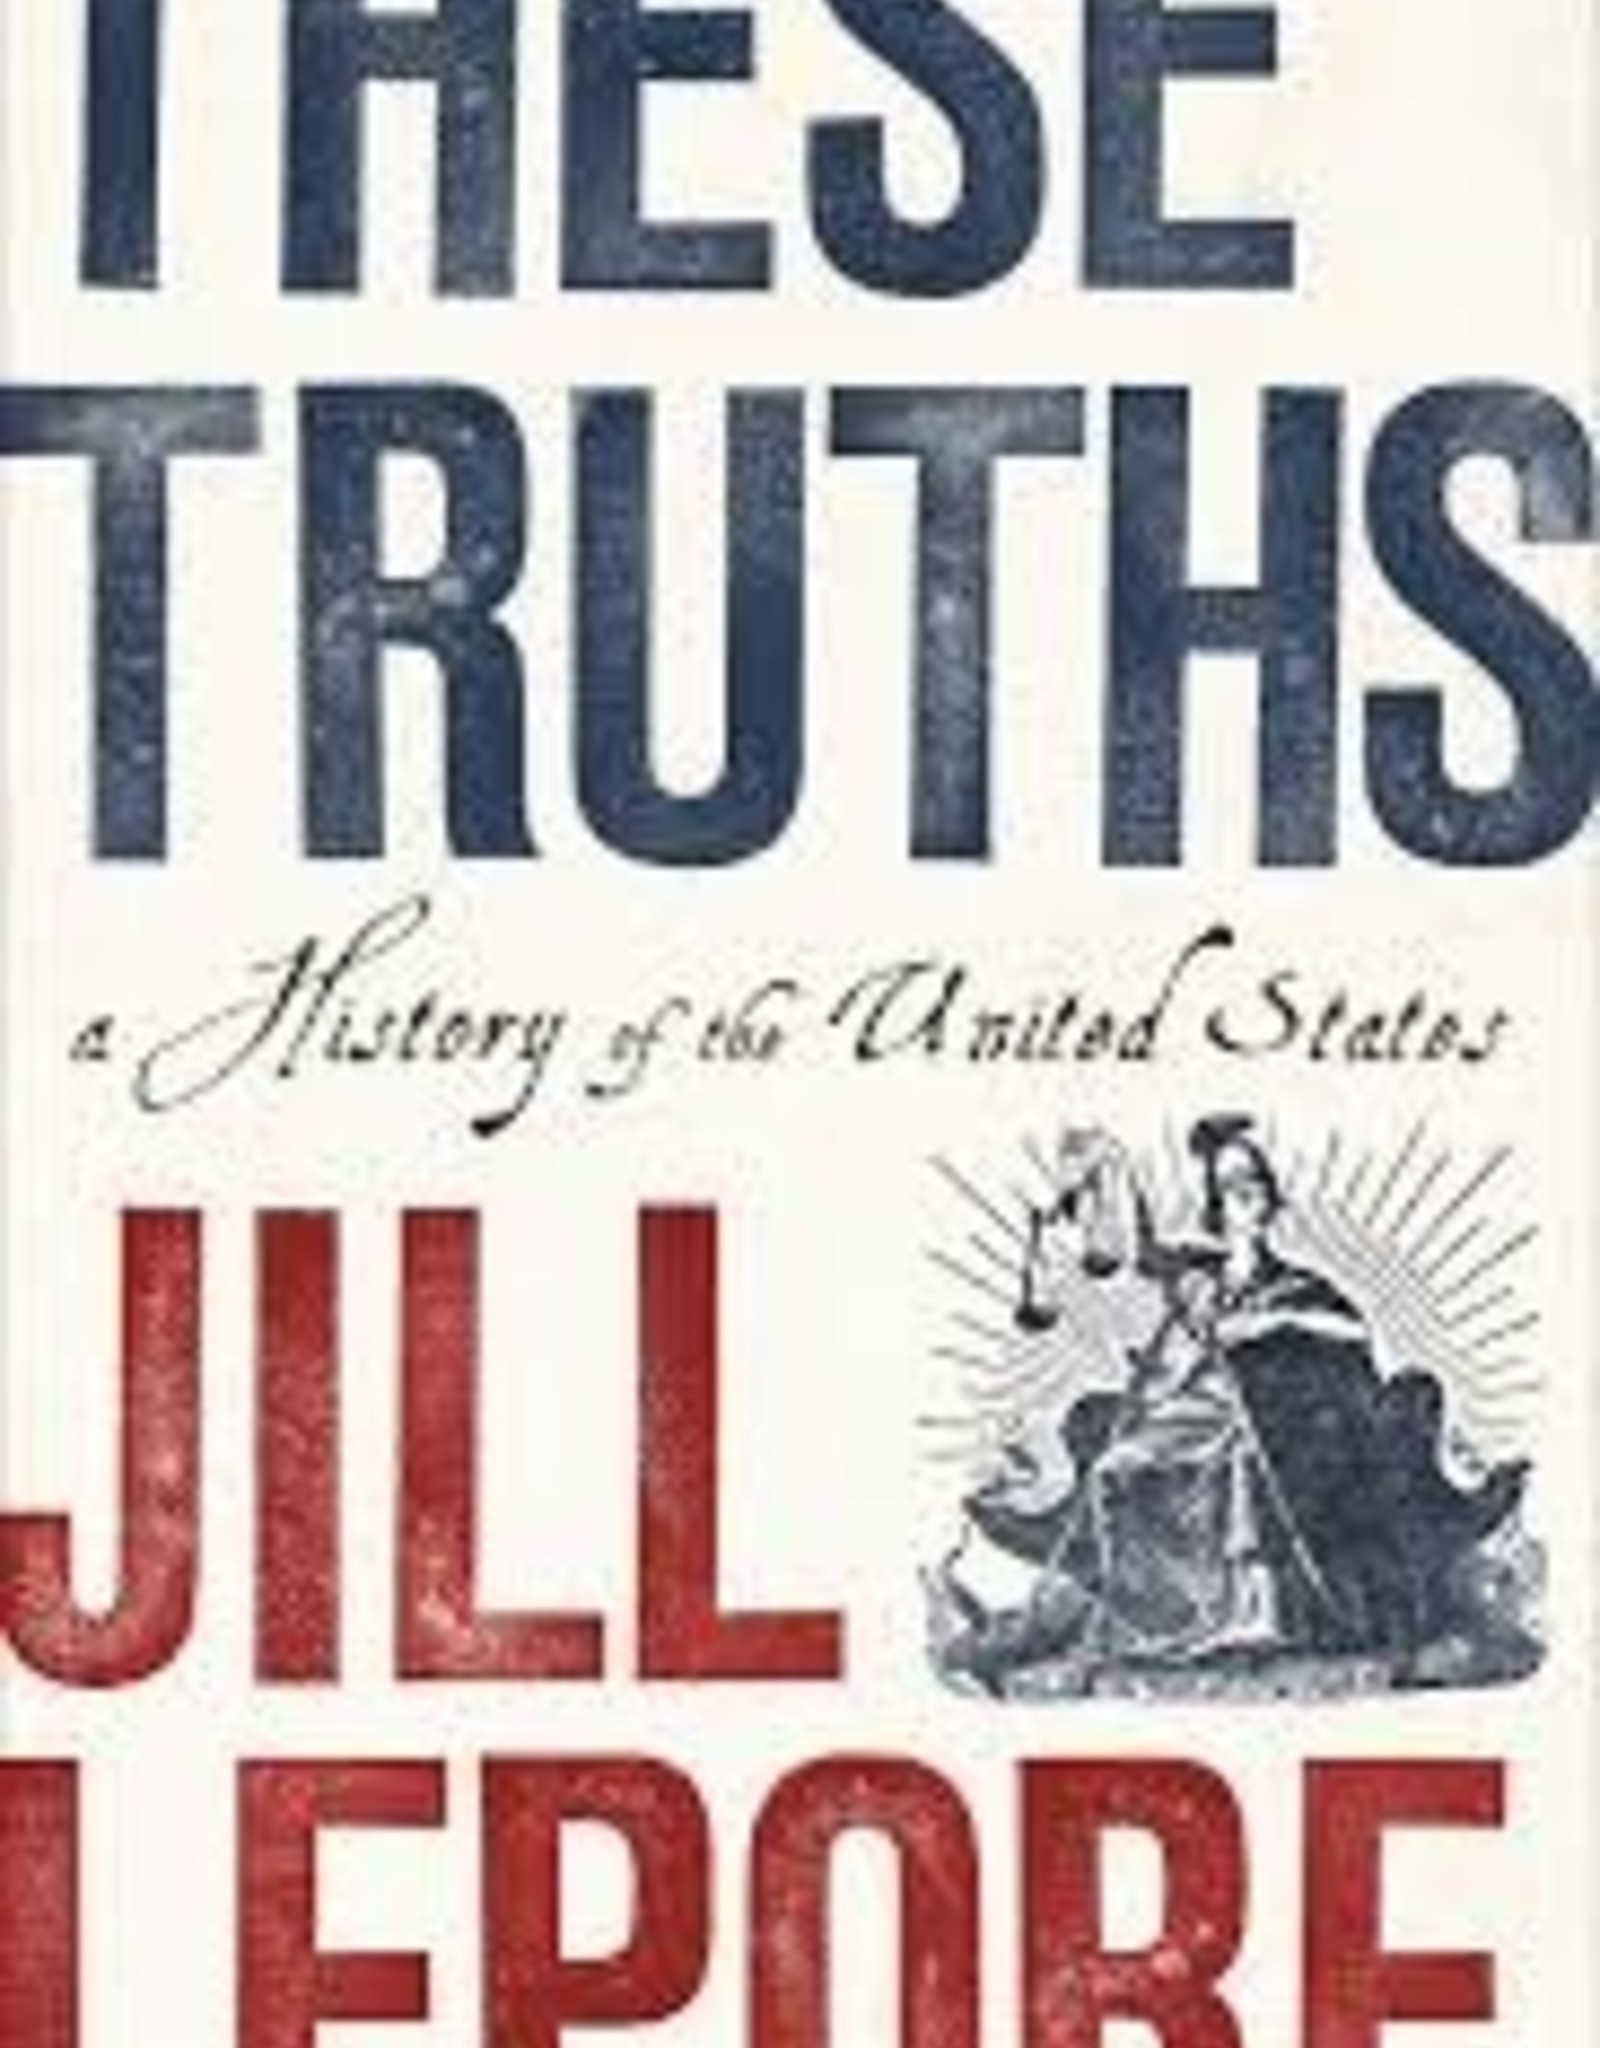 These Truths: A History of the United States - Hardcover